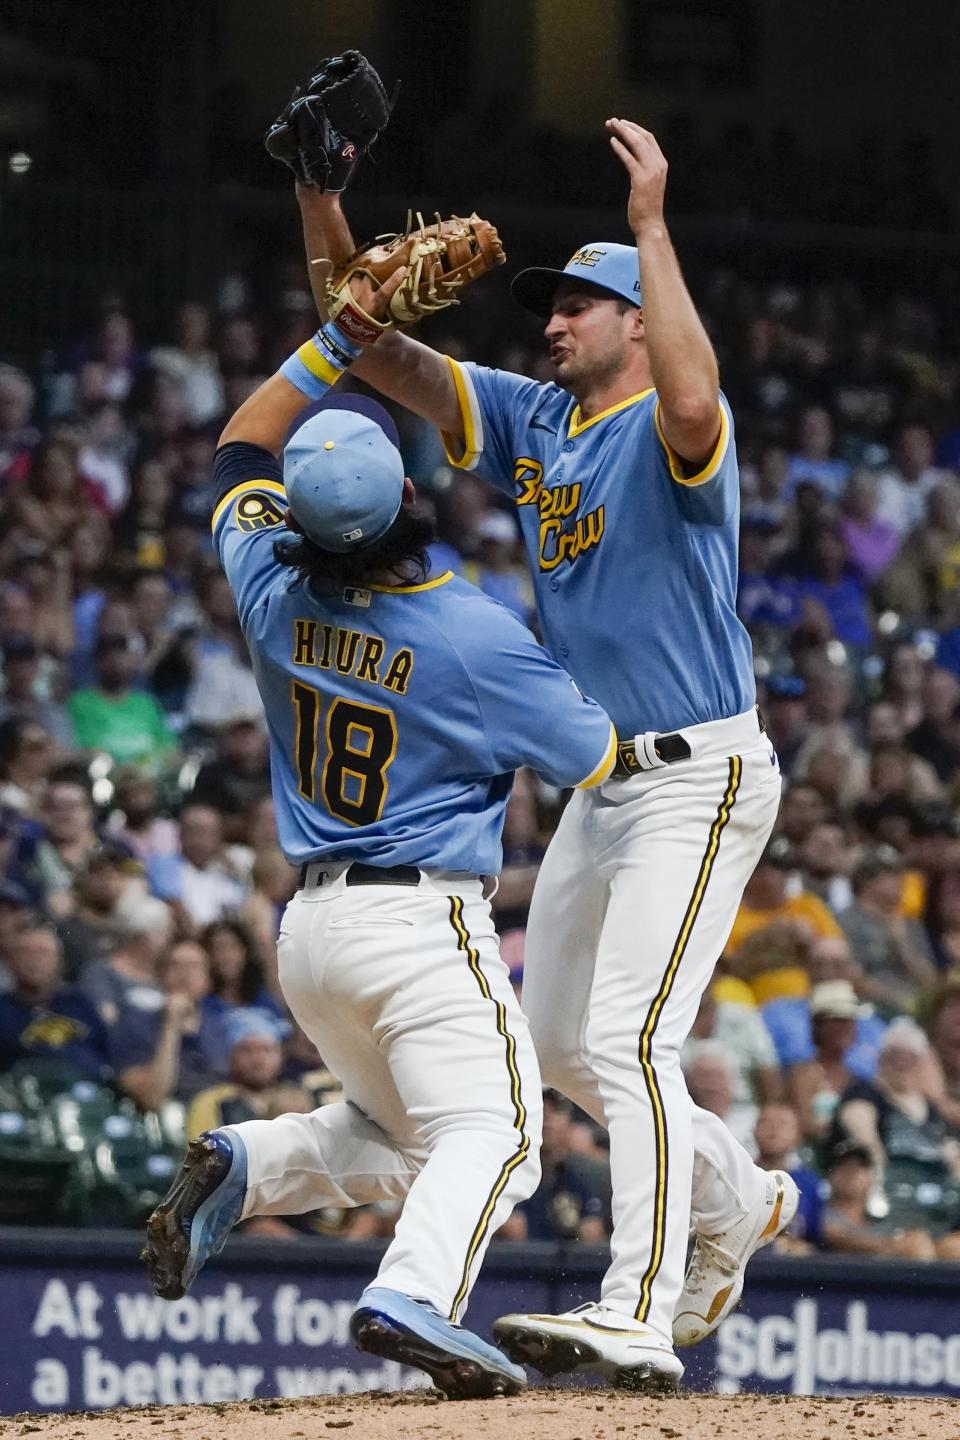 Milwaukee Brewers' Aaron Ashby colides with Keston Hiura as he catches a ball hit by Cincinnati Reds' Kyle Farmer during the fifth inning of a baseball game Saturday, Aug. 6, 2022, in Milwaukee. (AP Photo/Morry Gash)